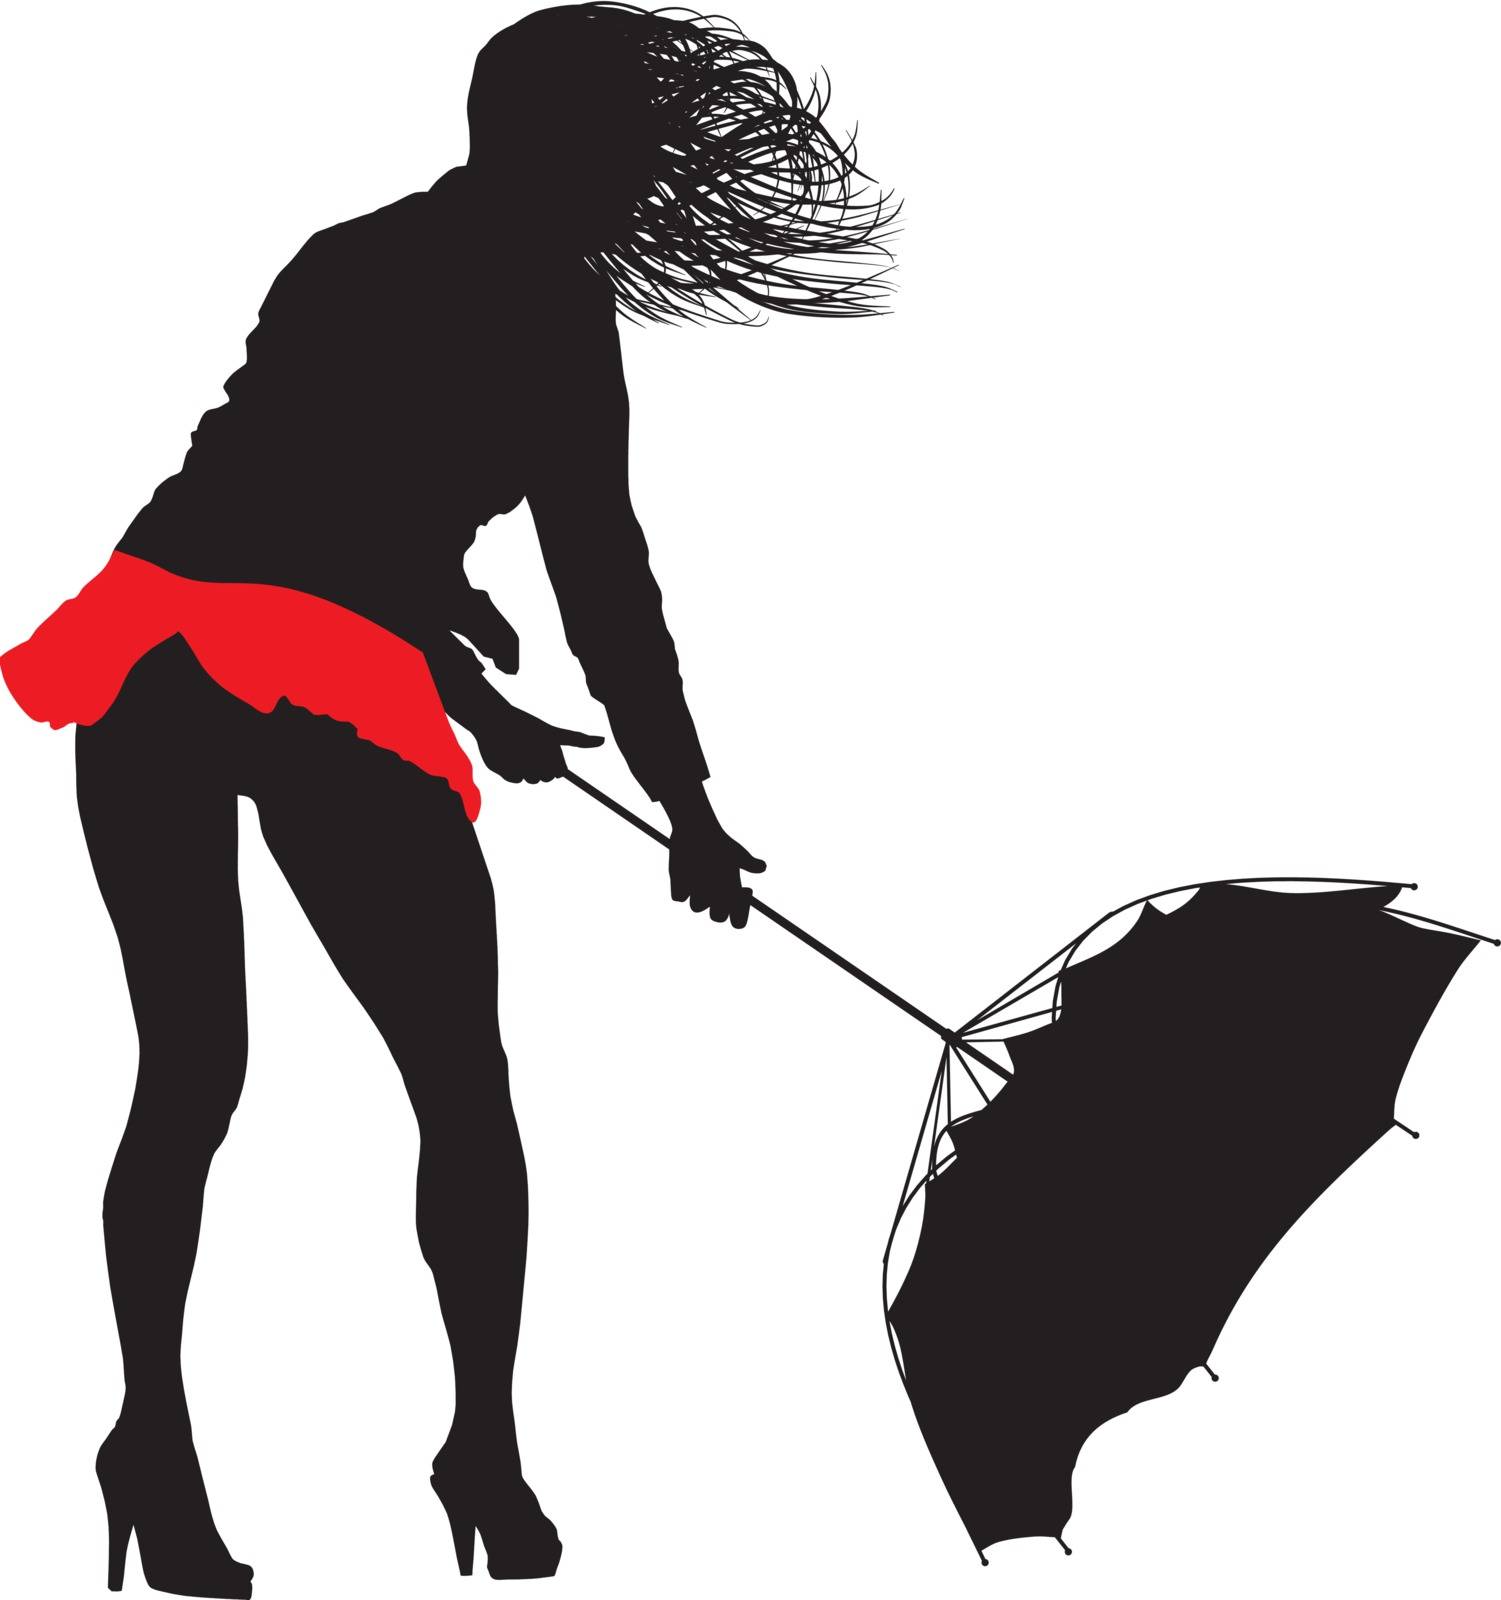 illustration of a woman with raised skirt and rebuttal umbrella